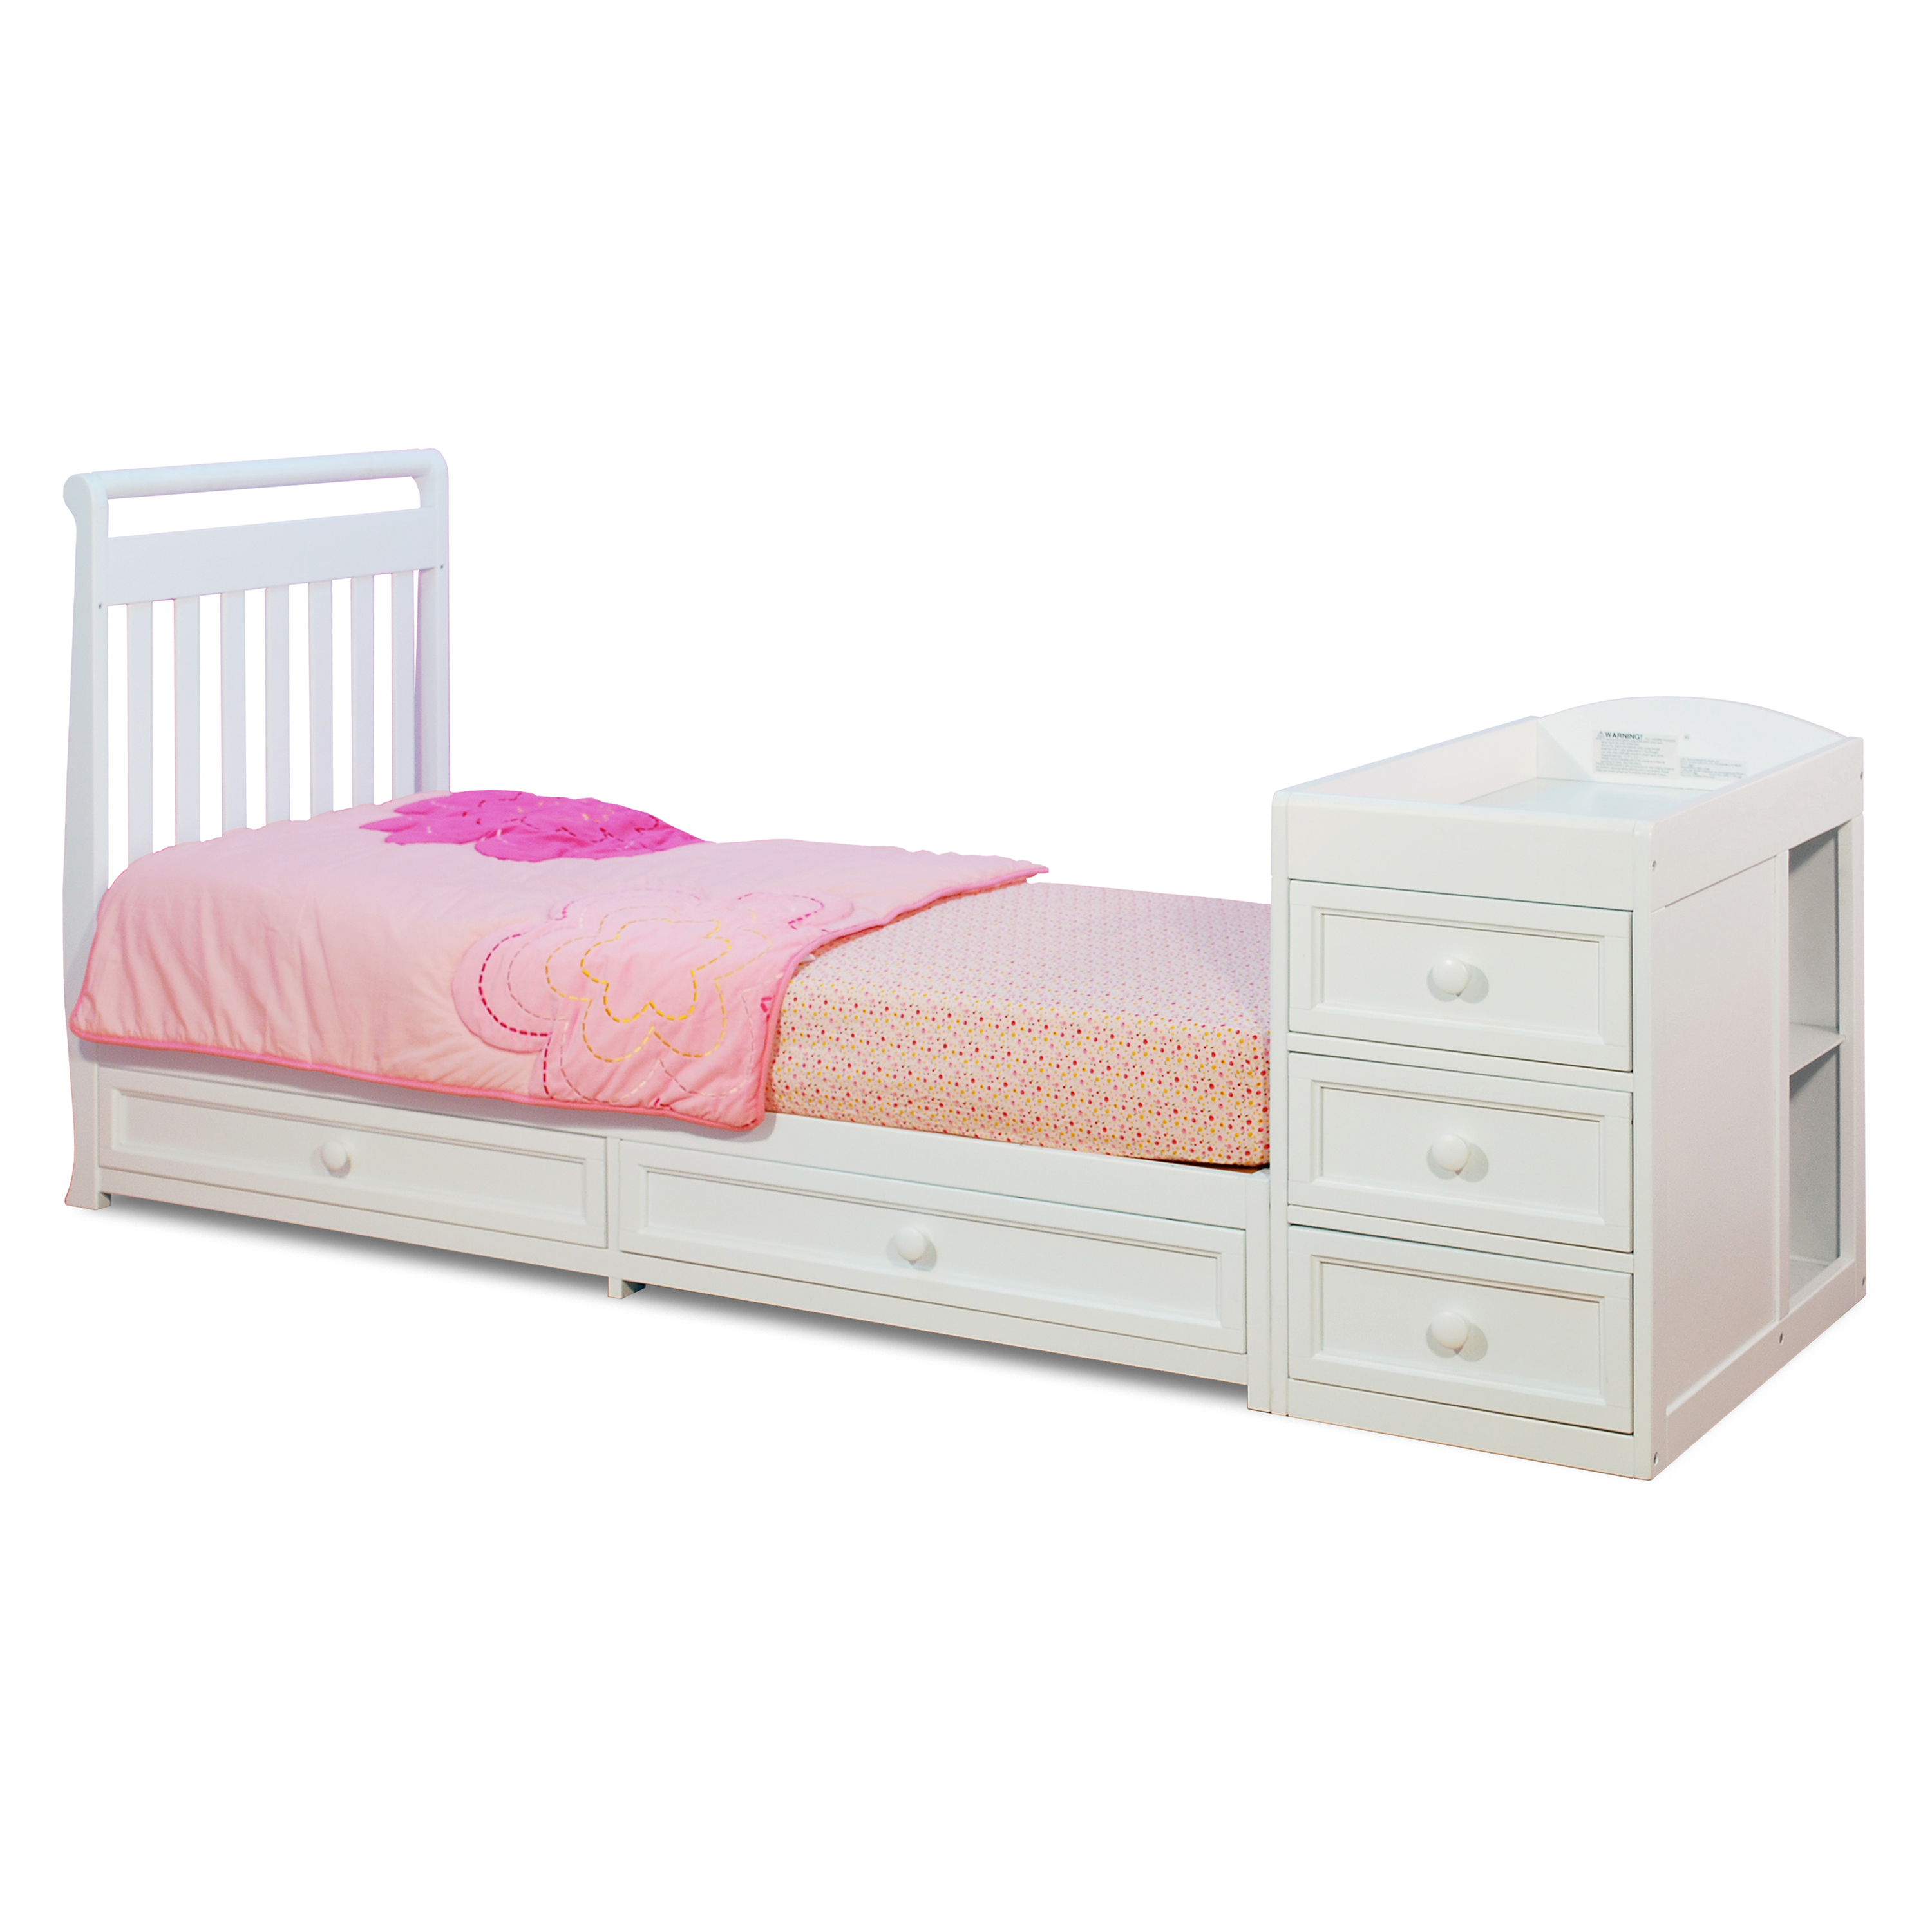 AFG Baby Furniture Daphne 2-in-1 Convertible Crib and Changer White - image 5 of 6